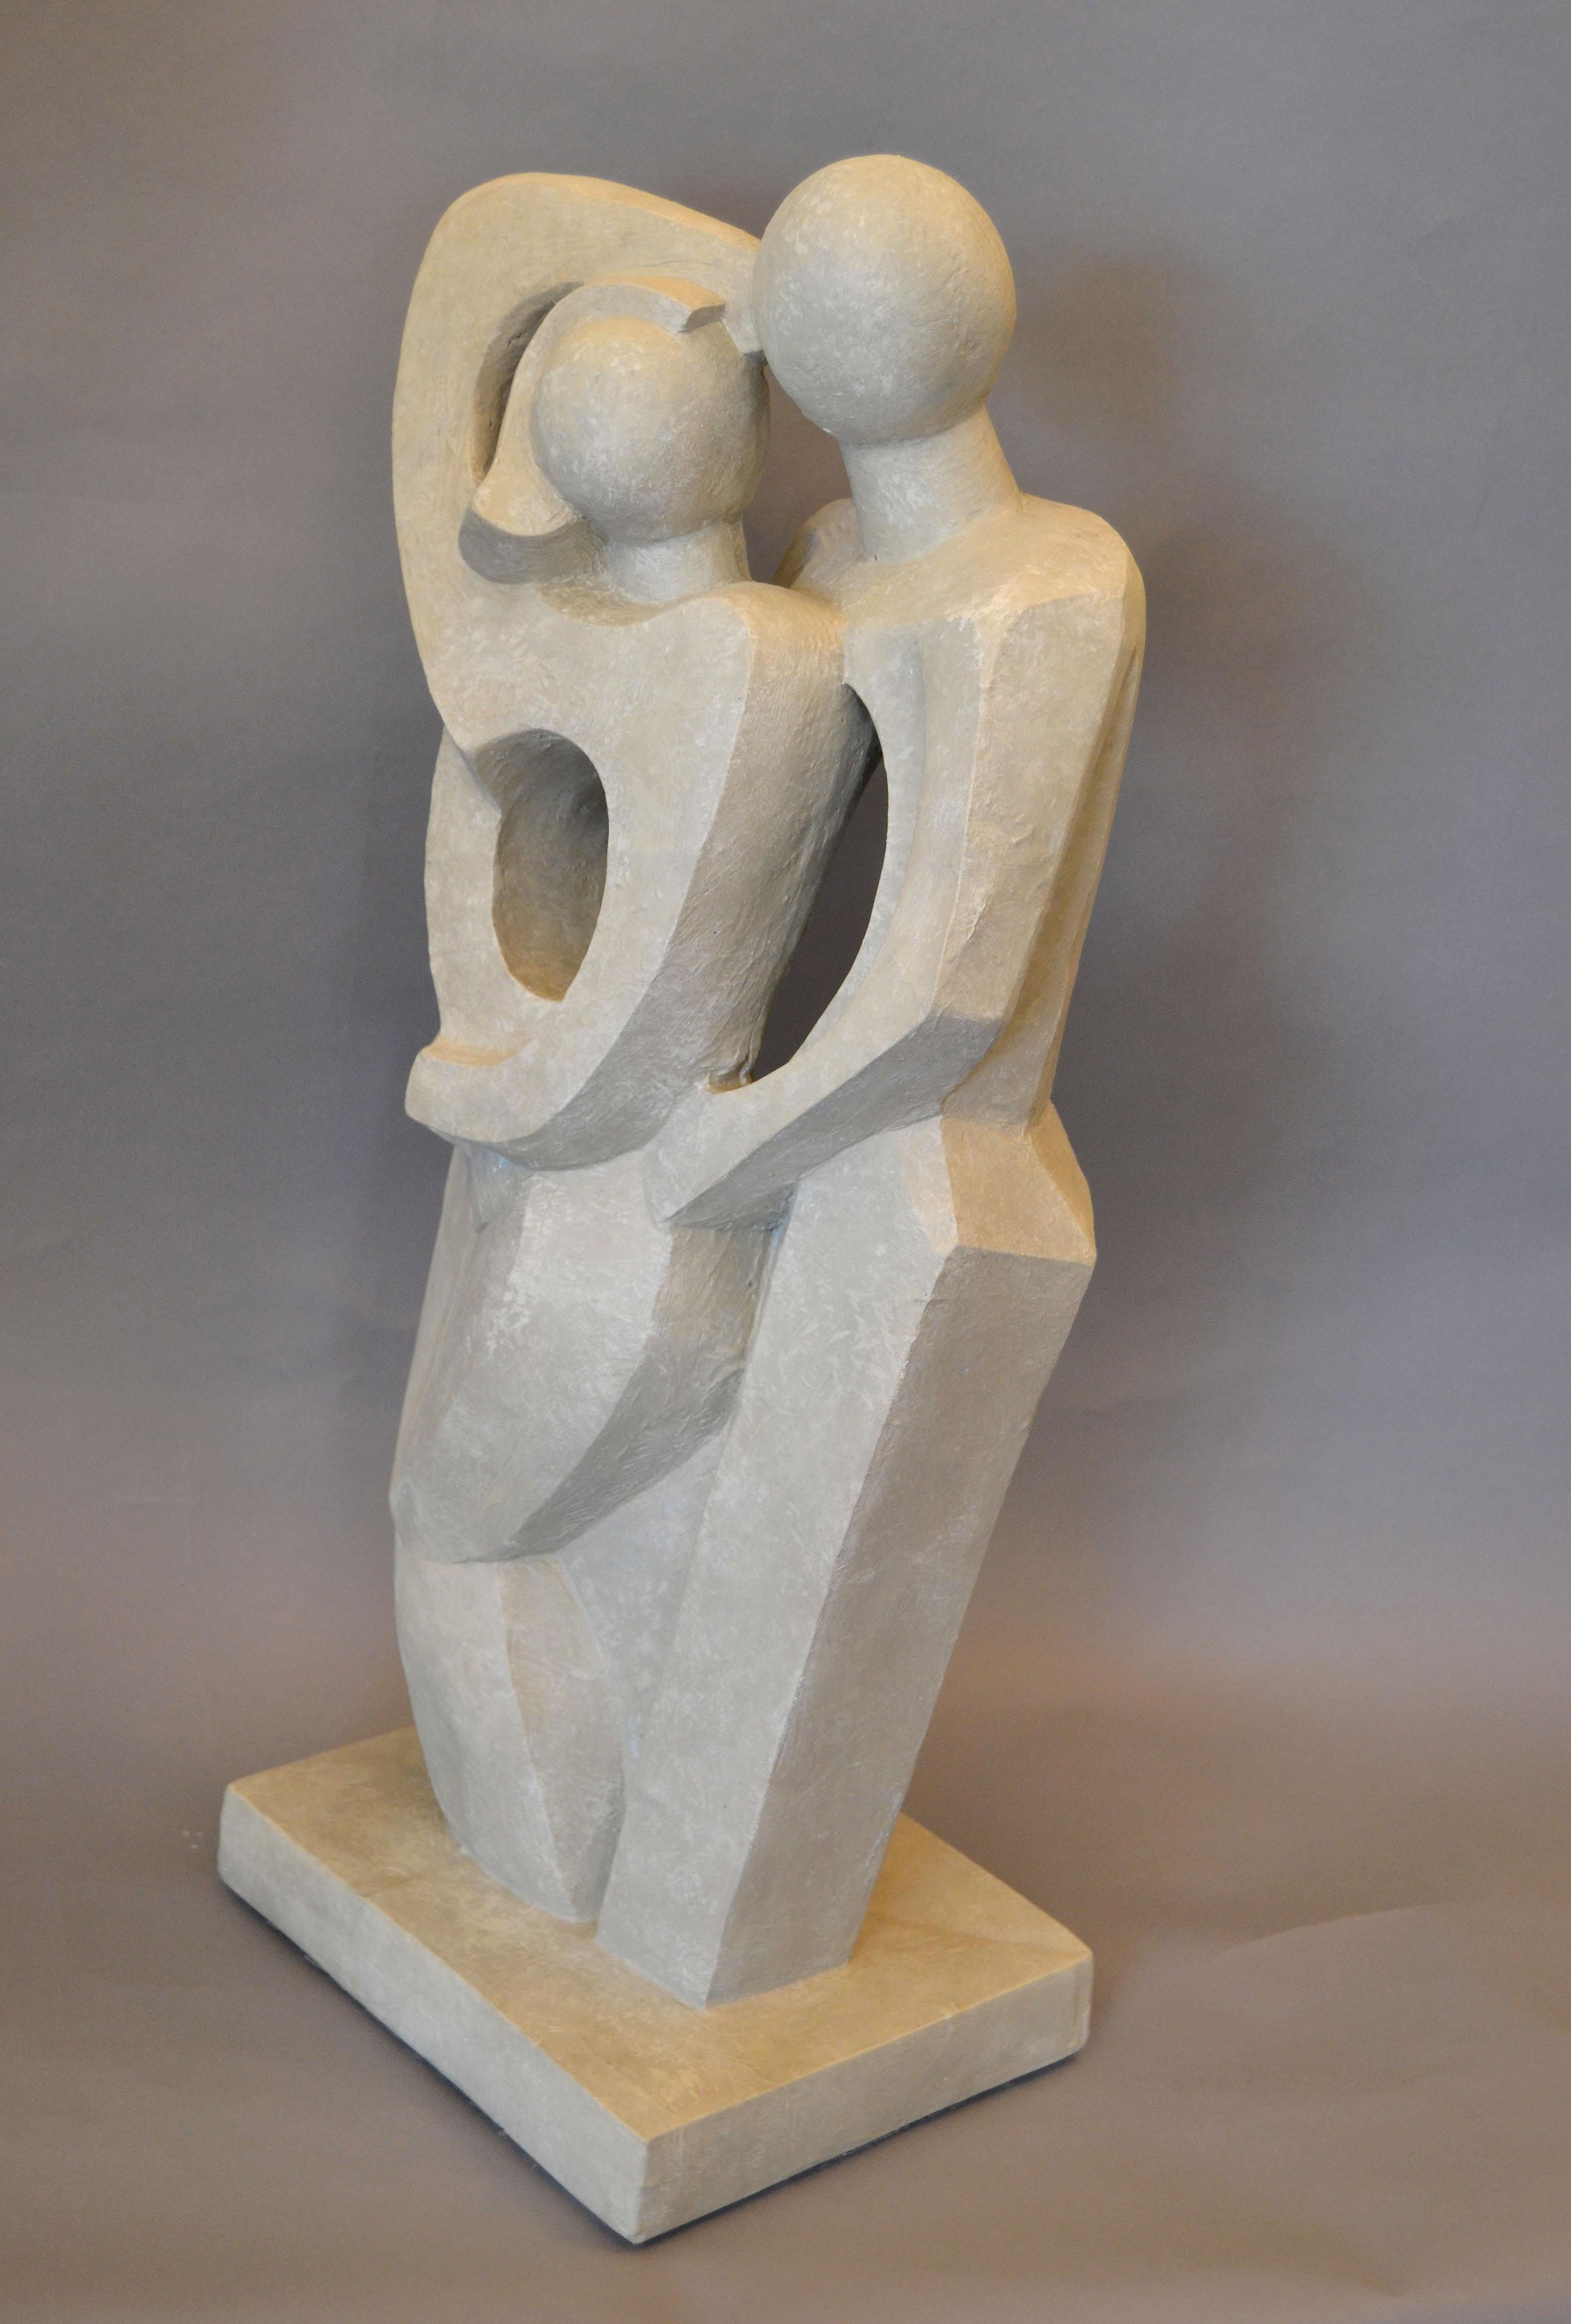 design and model an abstract sculpture in the round entitled embrace